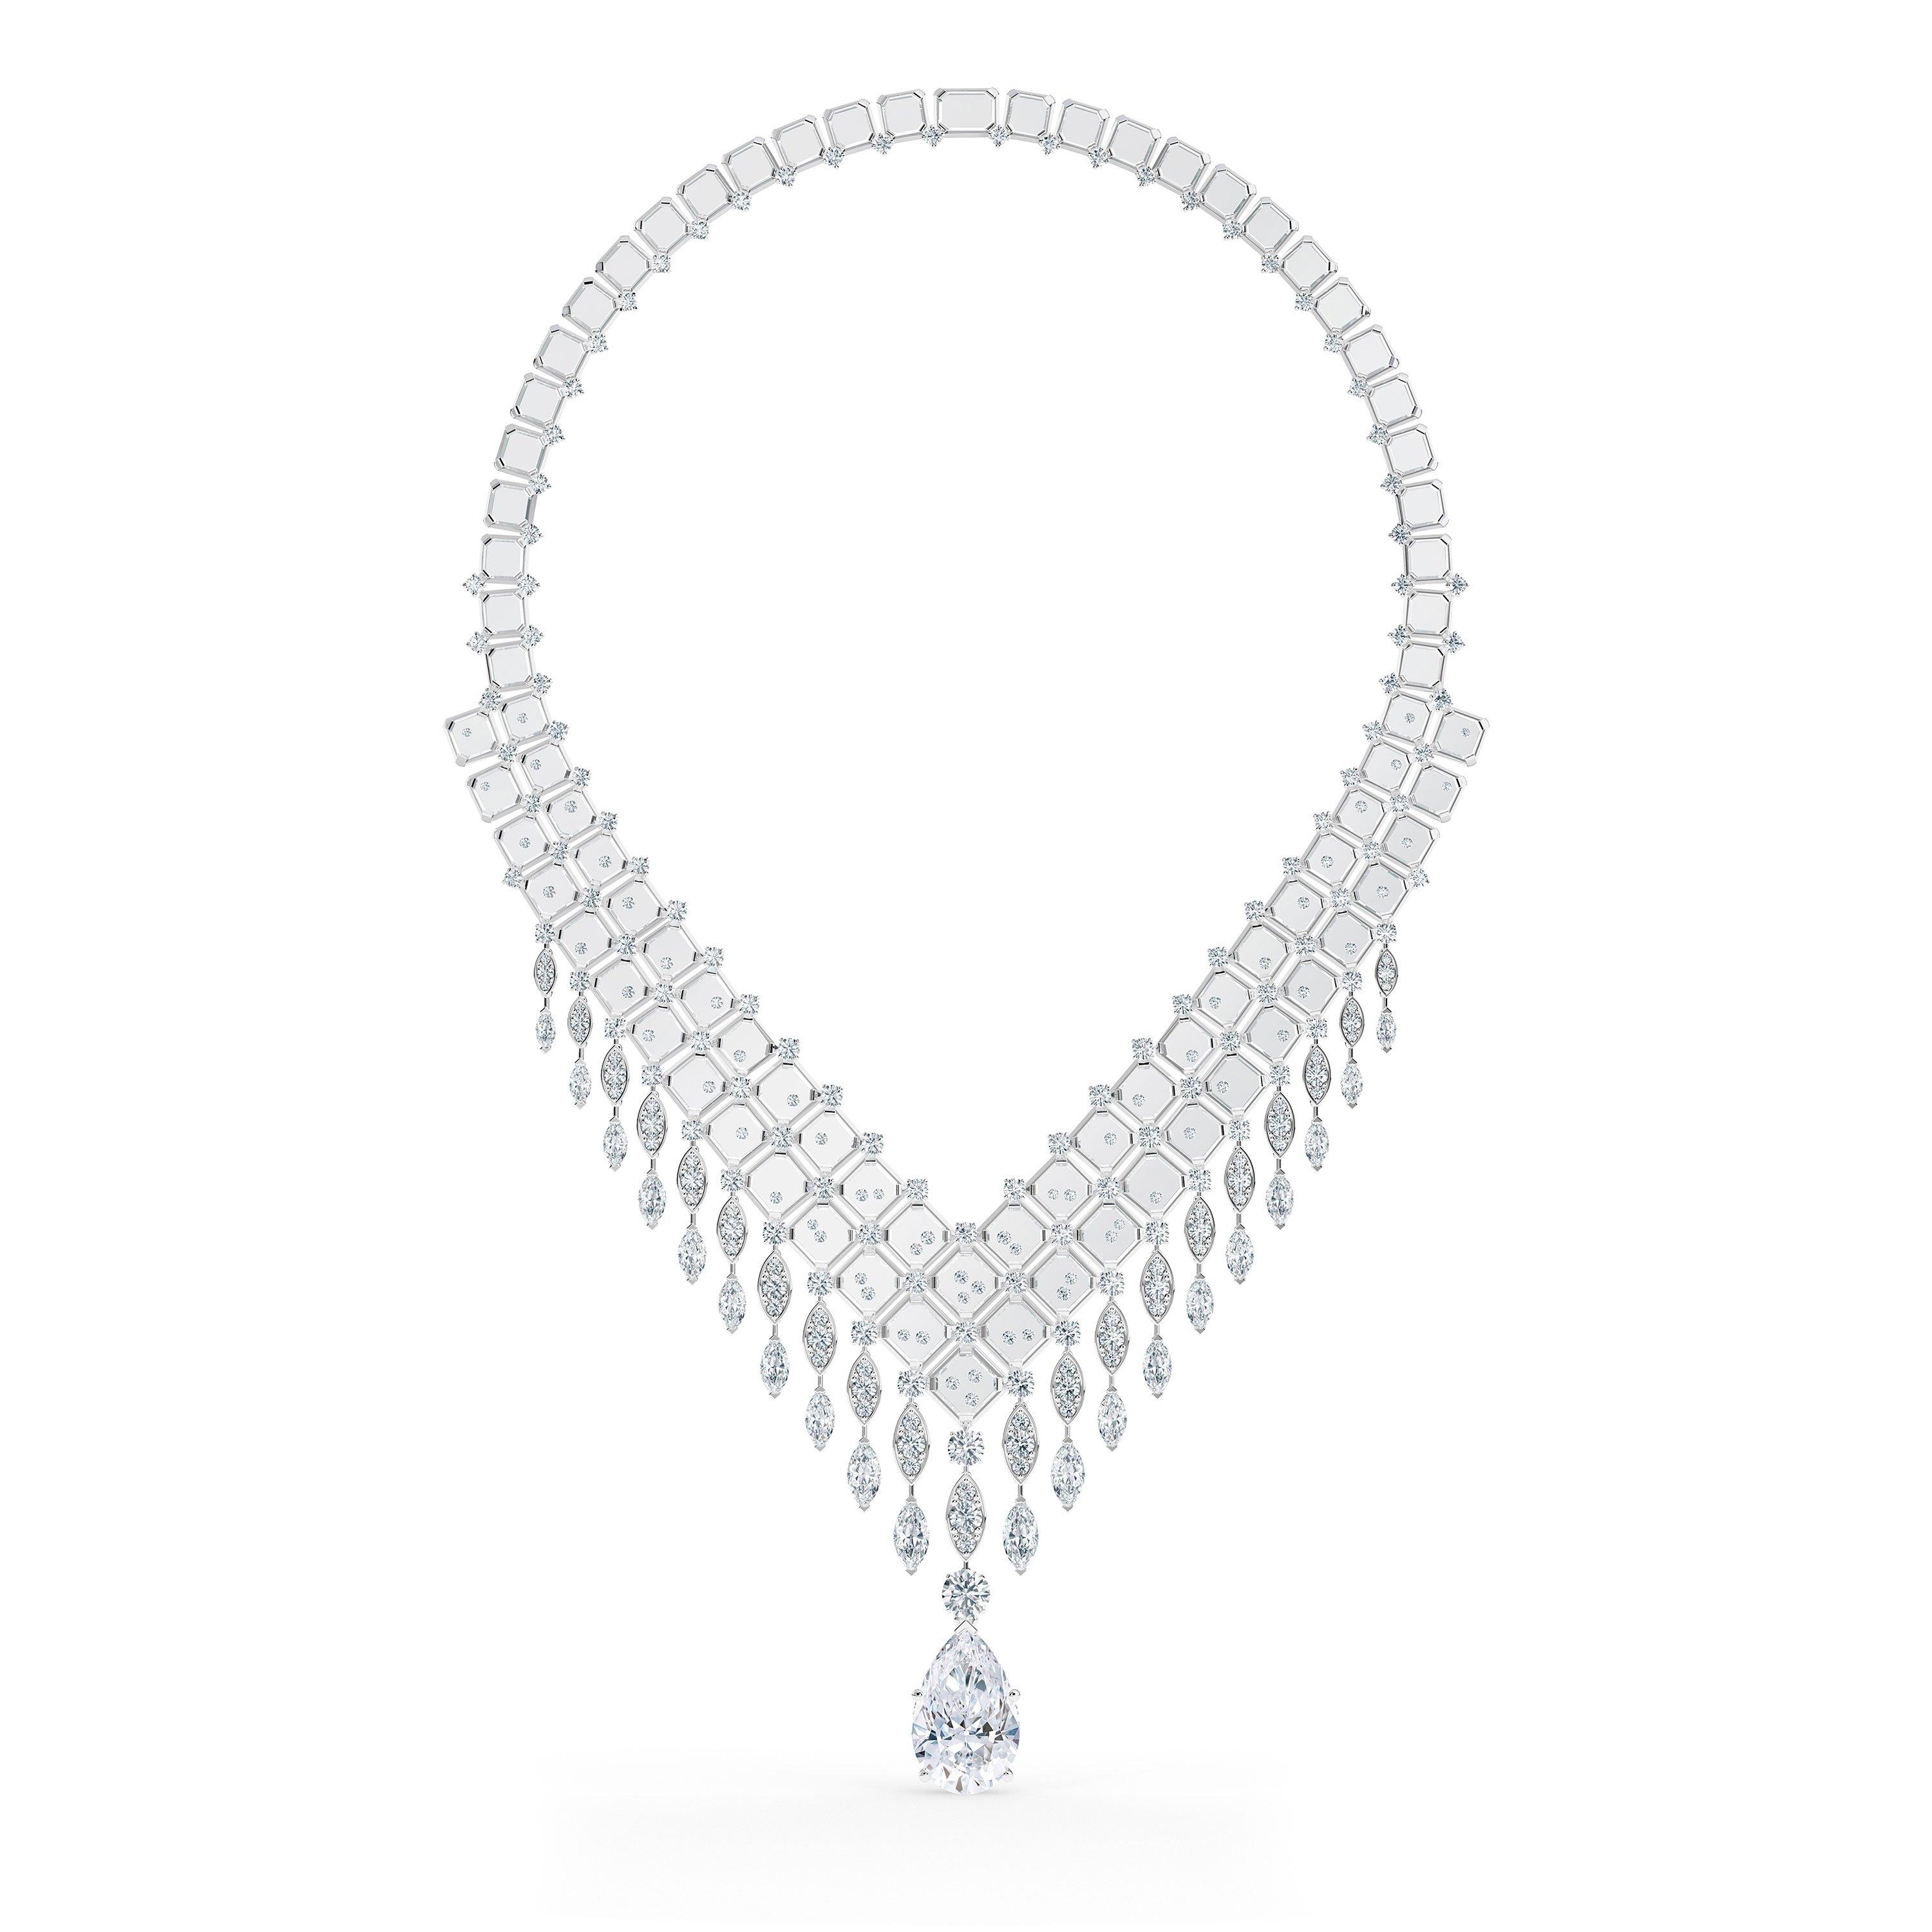 Thames Path necklace London by De Beers  Real diamond necklace, Diamond  jewelry designs, Jewelry